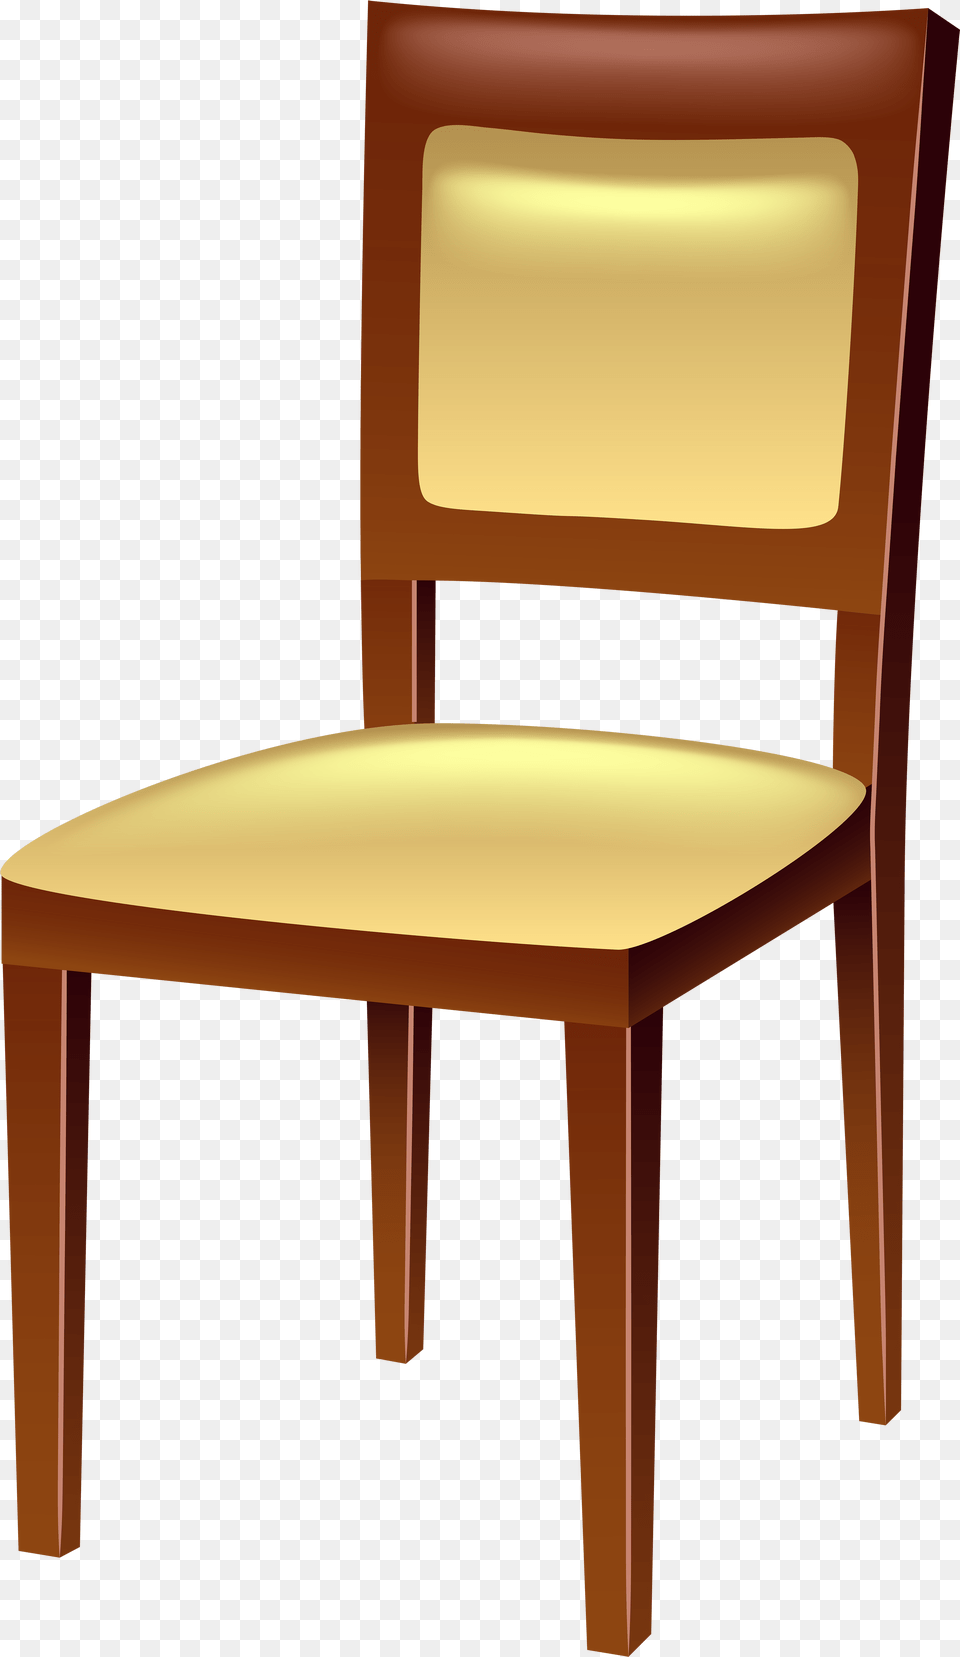 Chair Clip Art Imageu200b Gallery Yopriceville Chair Clipart Background, Furniture Free Transparent Png